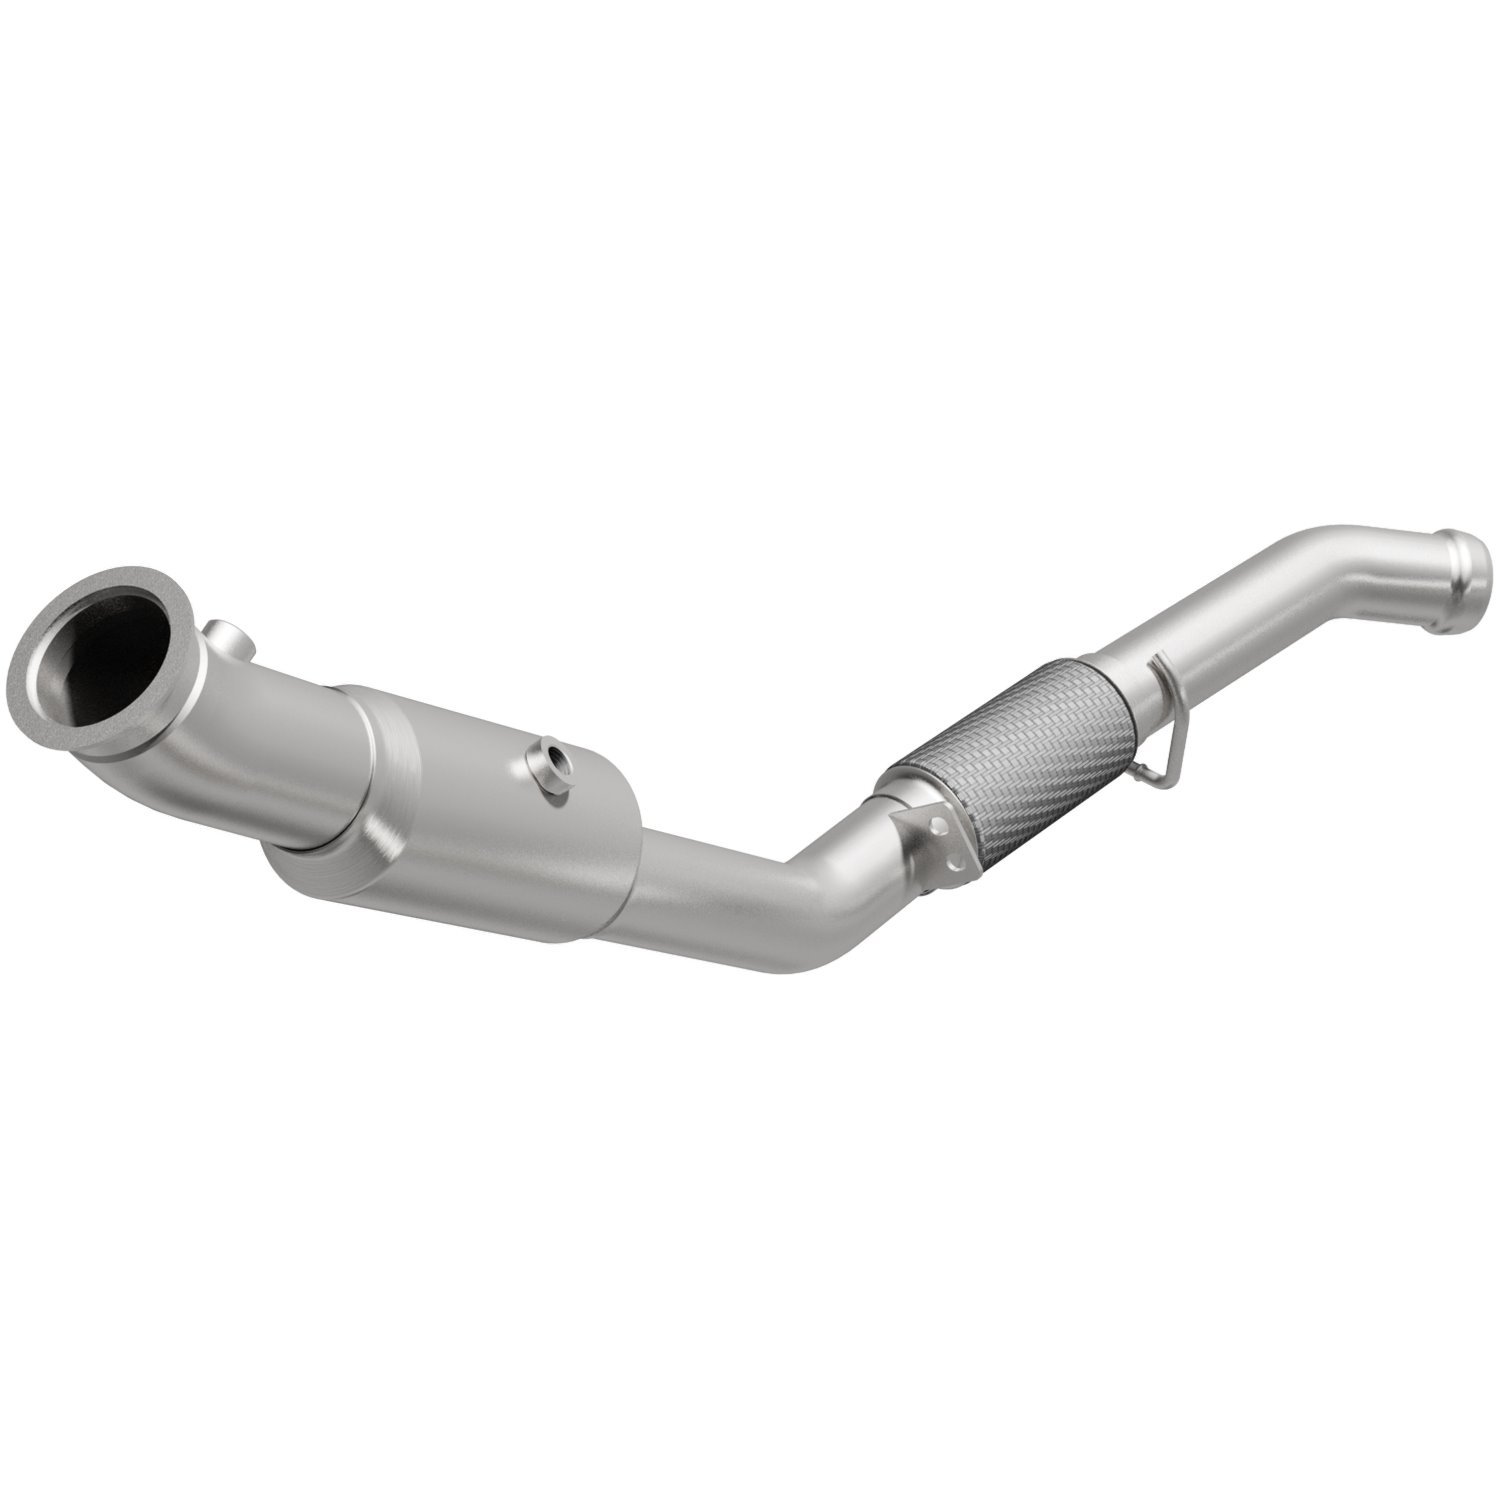 OEM Grade Federal / EPA Compliant Direct-Fit Catalytic Converter 21-551